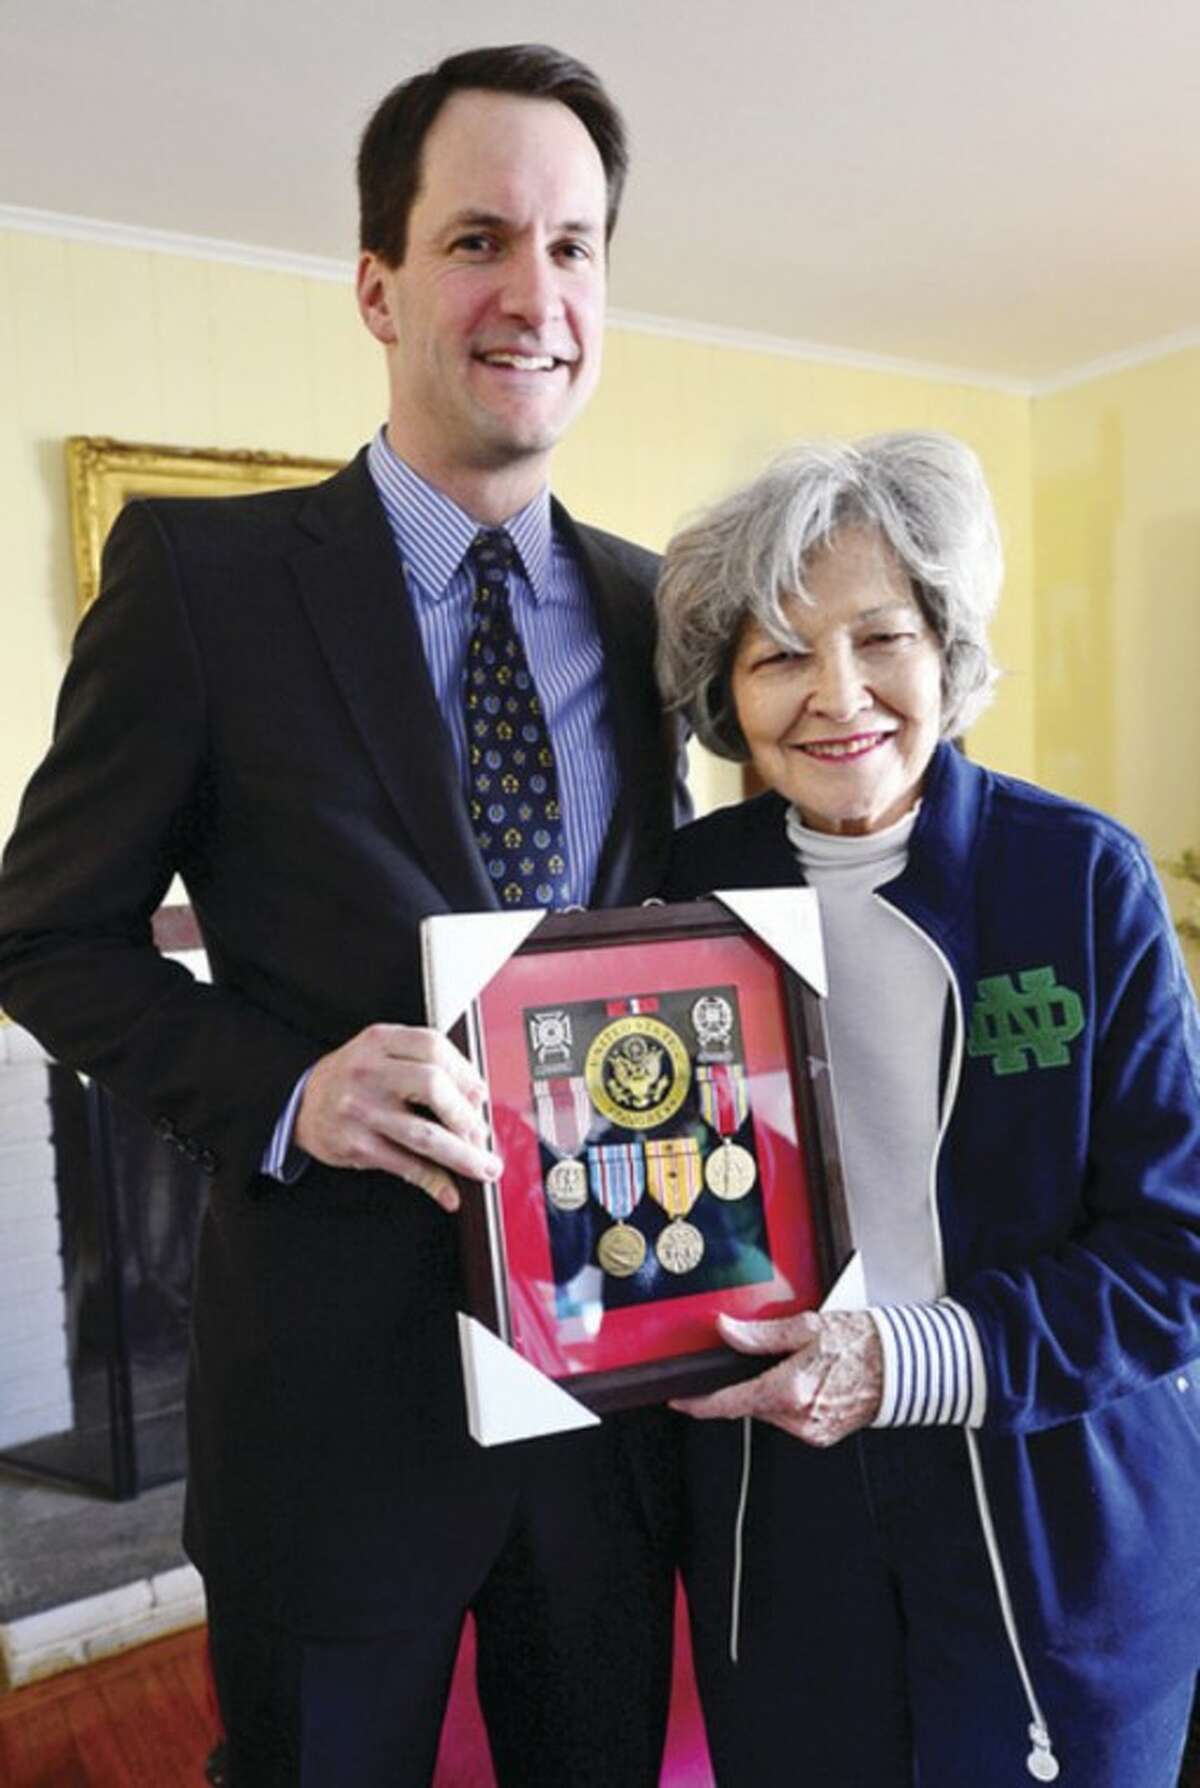 US Congressman Jim Himes delivers eight military service medals to the widow of late U.S. Army Sgt. Clarence Schaffer Jr., Kathleen Schaffer, recognizing the World War II veteran's service as a member of the Parachute Infantry Regiment during a brief ceremony at the Schaffer home Tuesday morning.